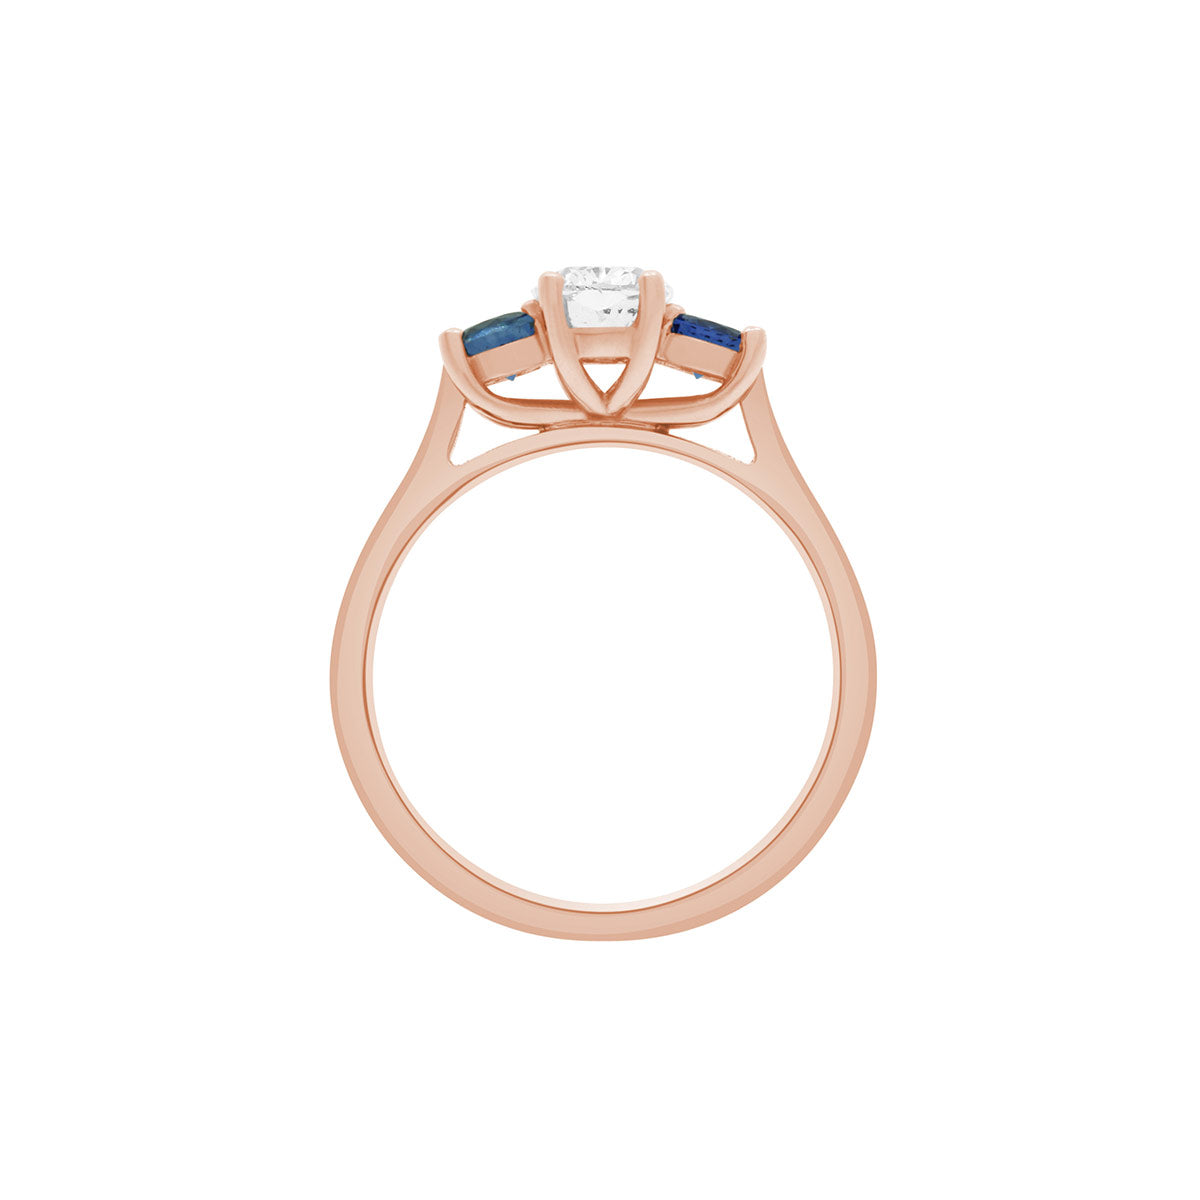 Diamond Sapphire Trilogy set in rose gold in an upright position